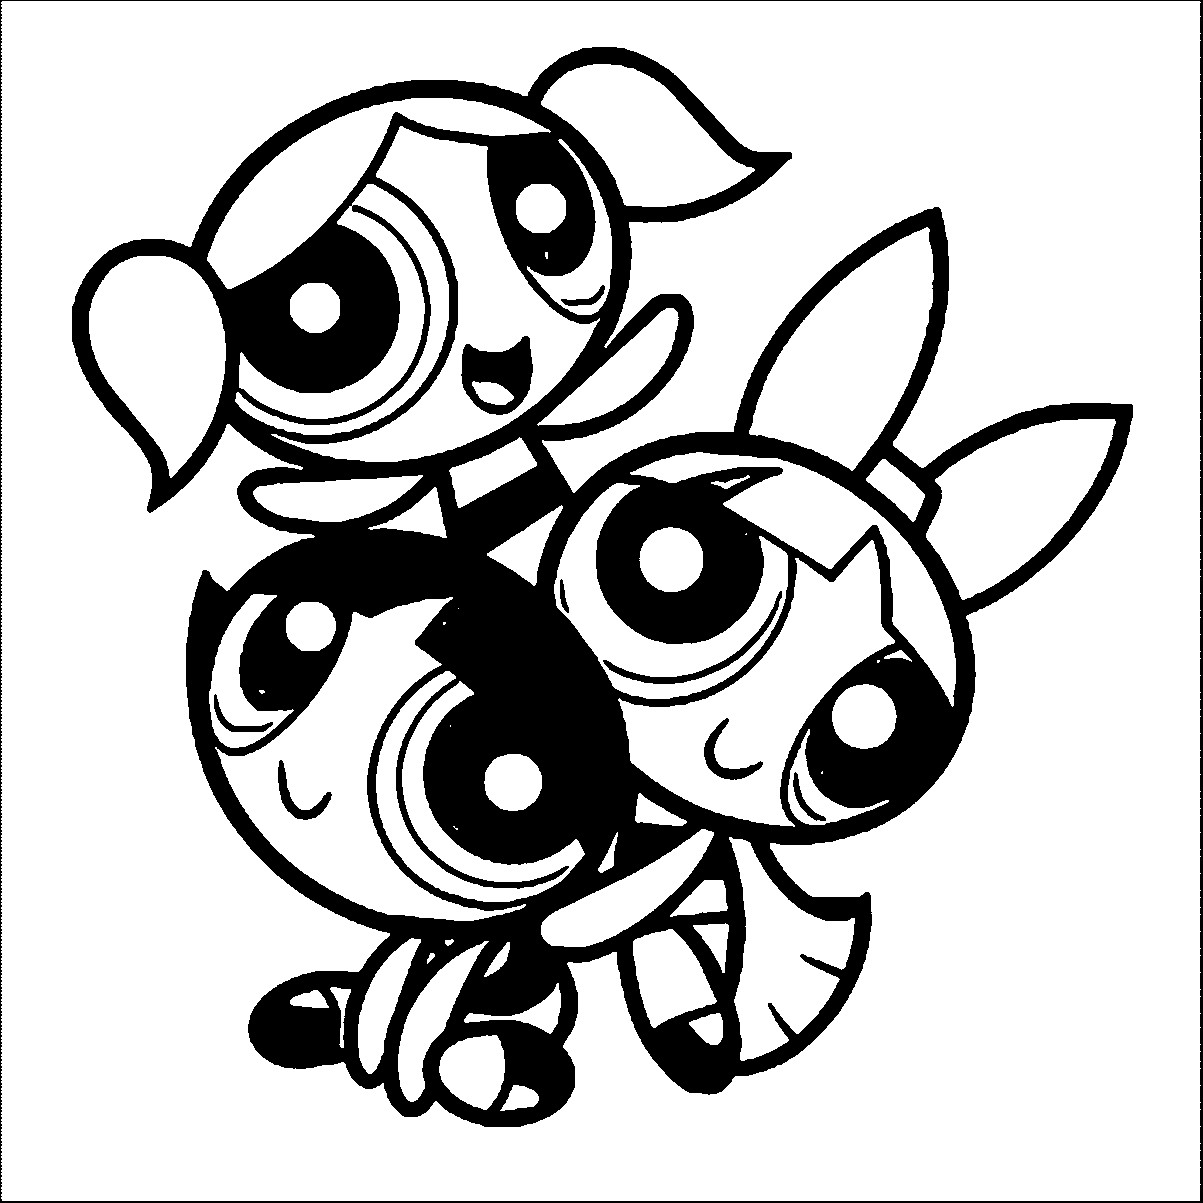 Powder Puff Girls Coloring Pages
 Powerpuff Girls Coloring Pages